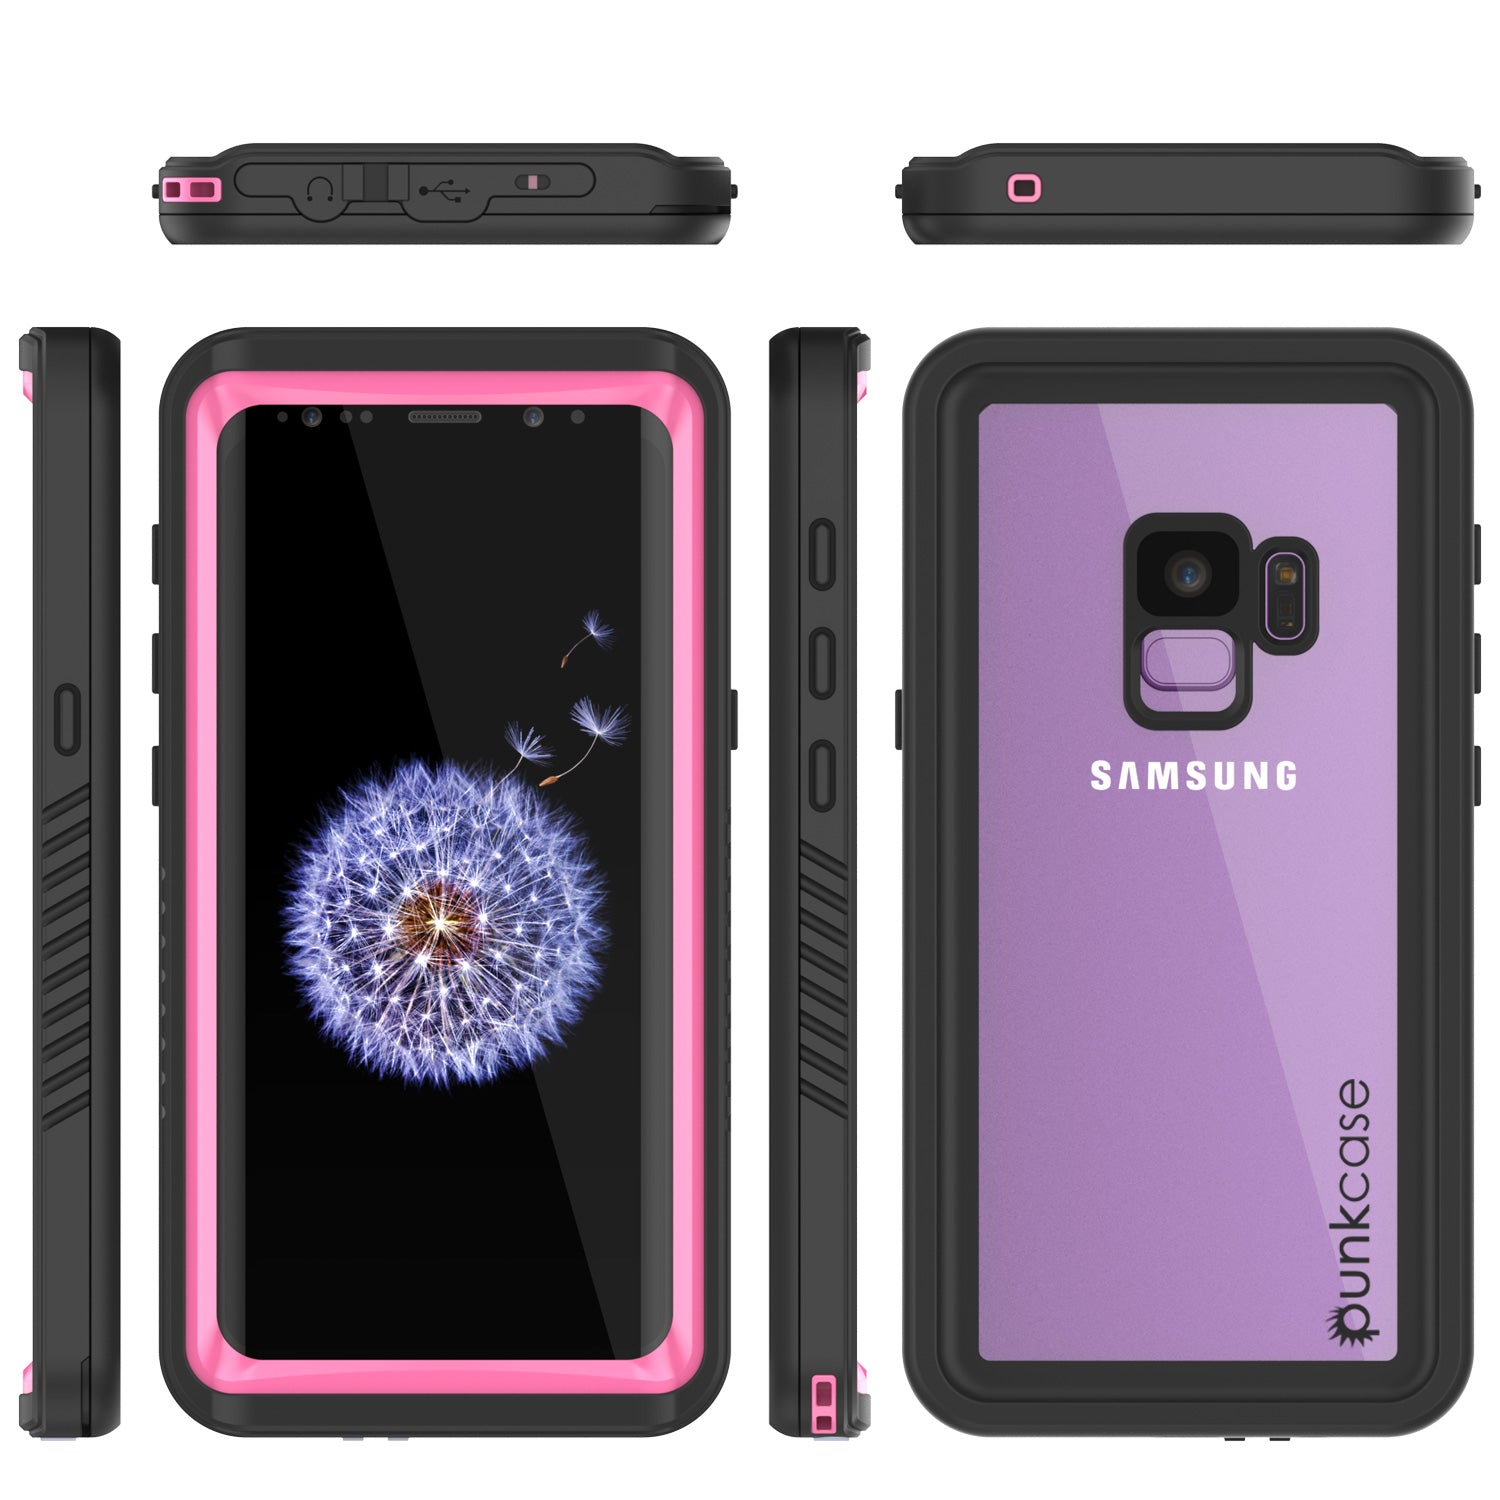 Galaxy S9 PLUS Waterproof Case, Punkcase [Extreme Series] [Slim Fit] [IP68 Certified] [Shockproof] [Snowproof] [Dirproof] Armor Cover W/ Built In Screen Protector for Samsung Galaxy S9+ [Pink] - PunkCase NZ